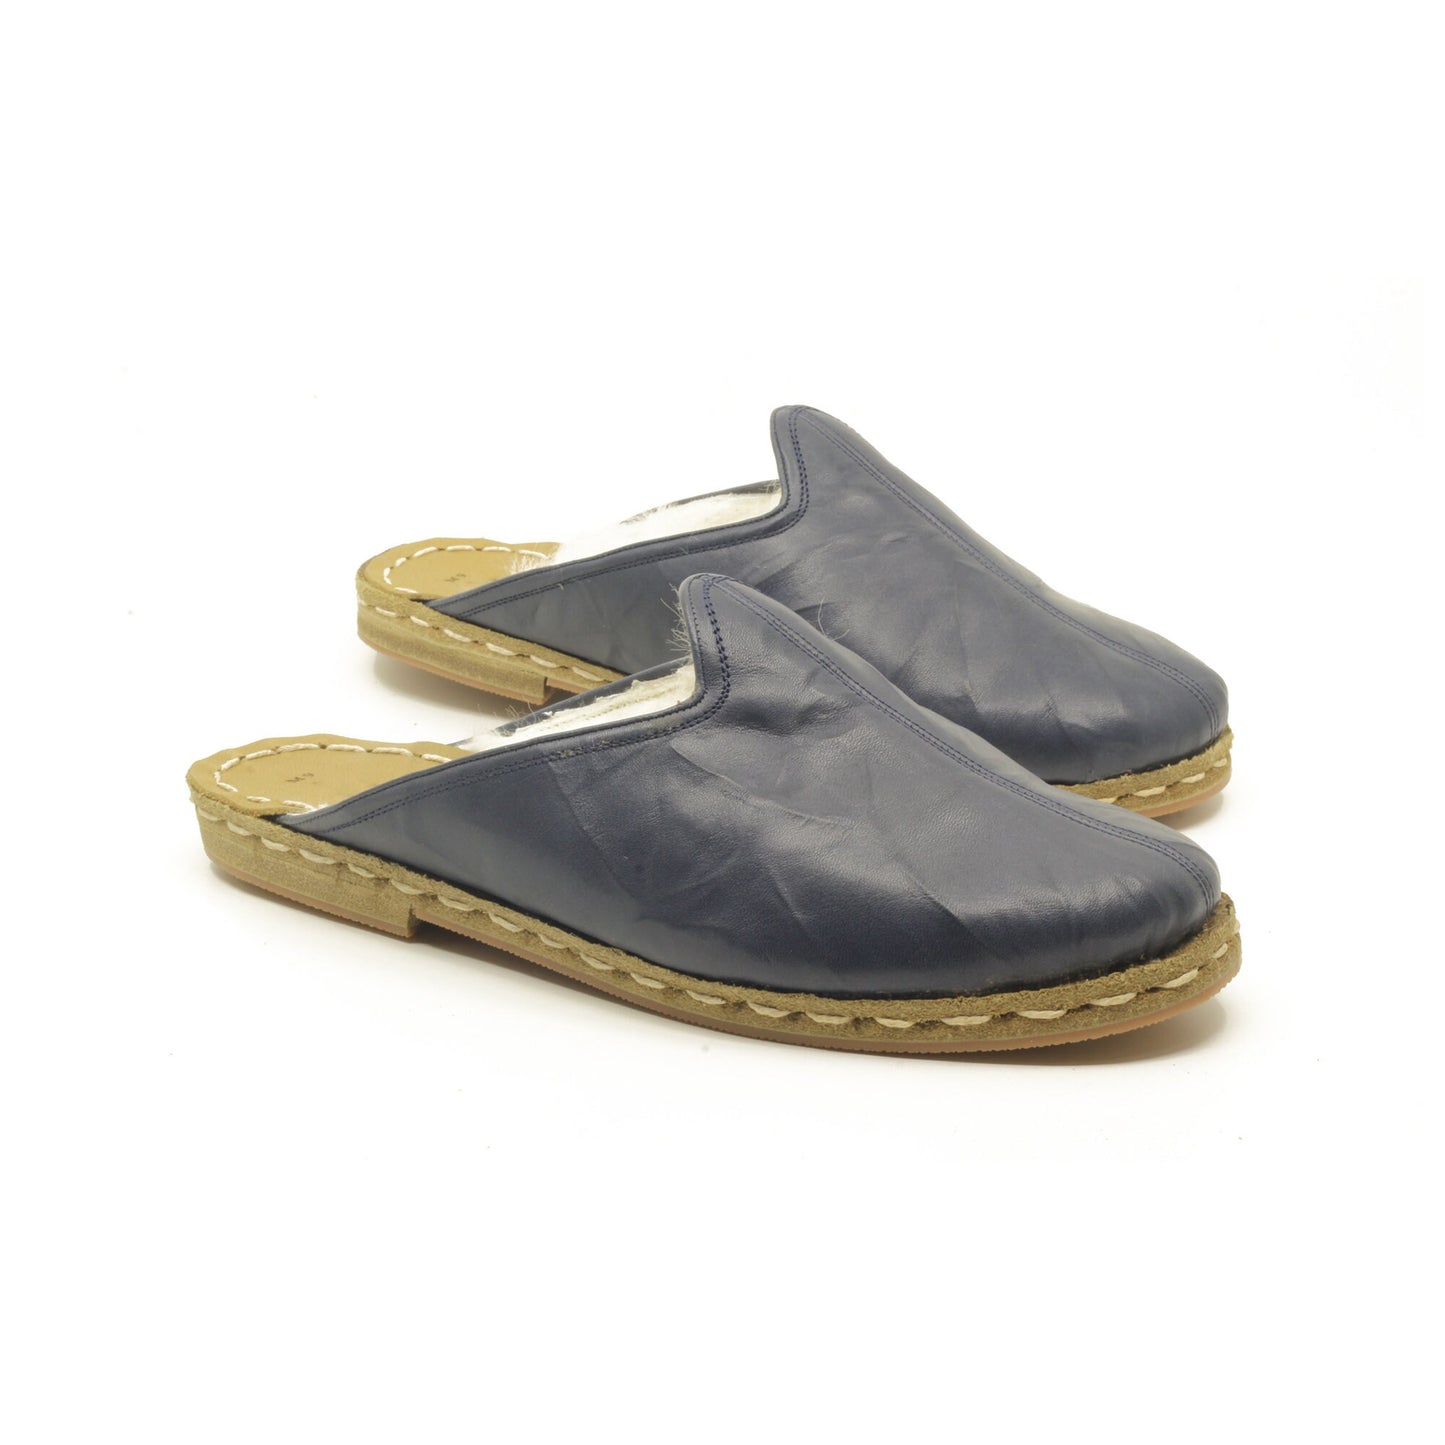 Winter Slippers  - Sheepskin slippers  - Close Toed Slippers - Navy Blue Leather – Rubber Sole - For Women